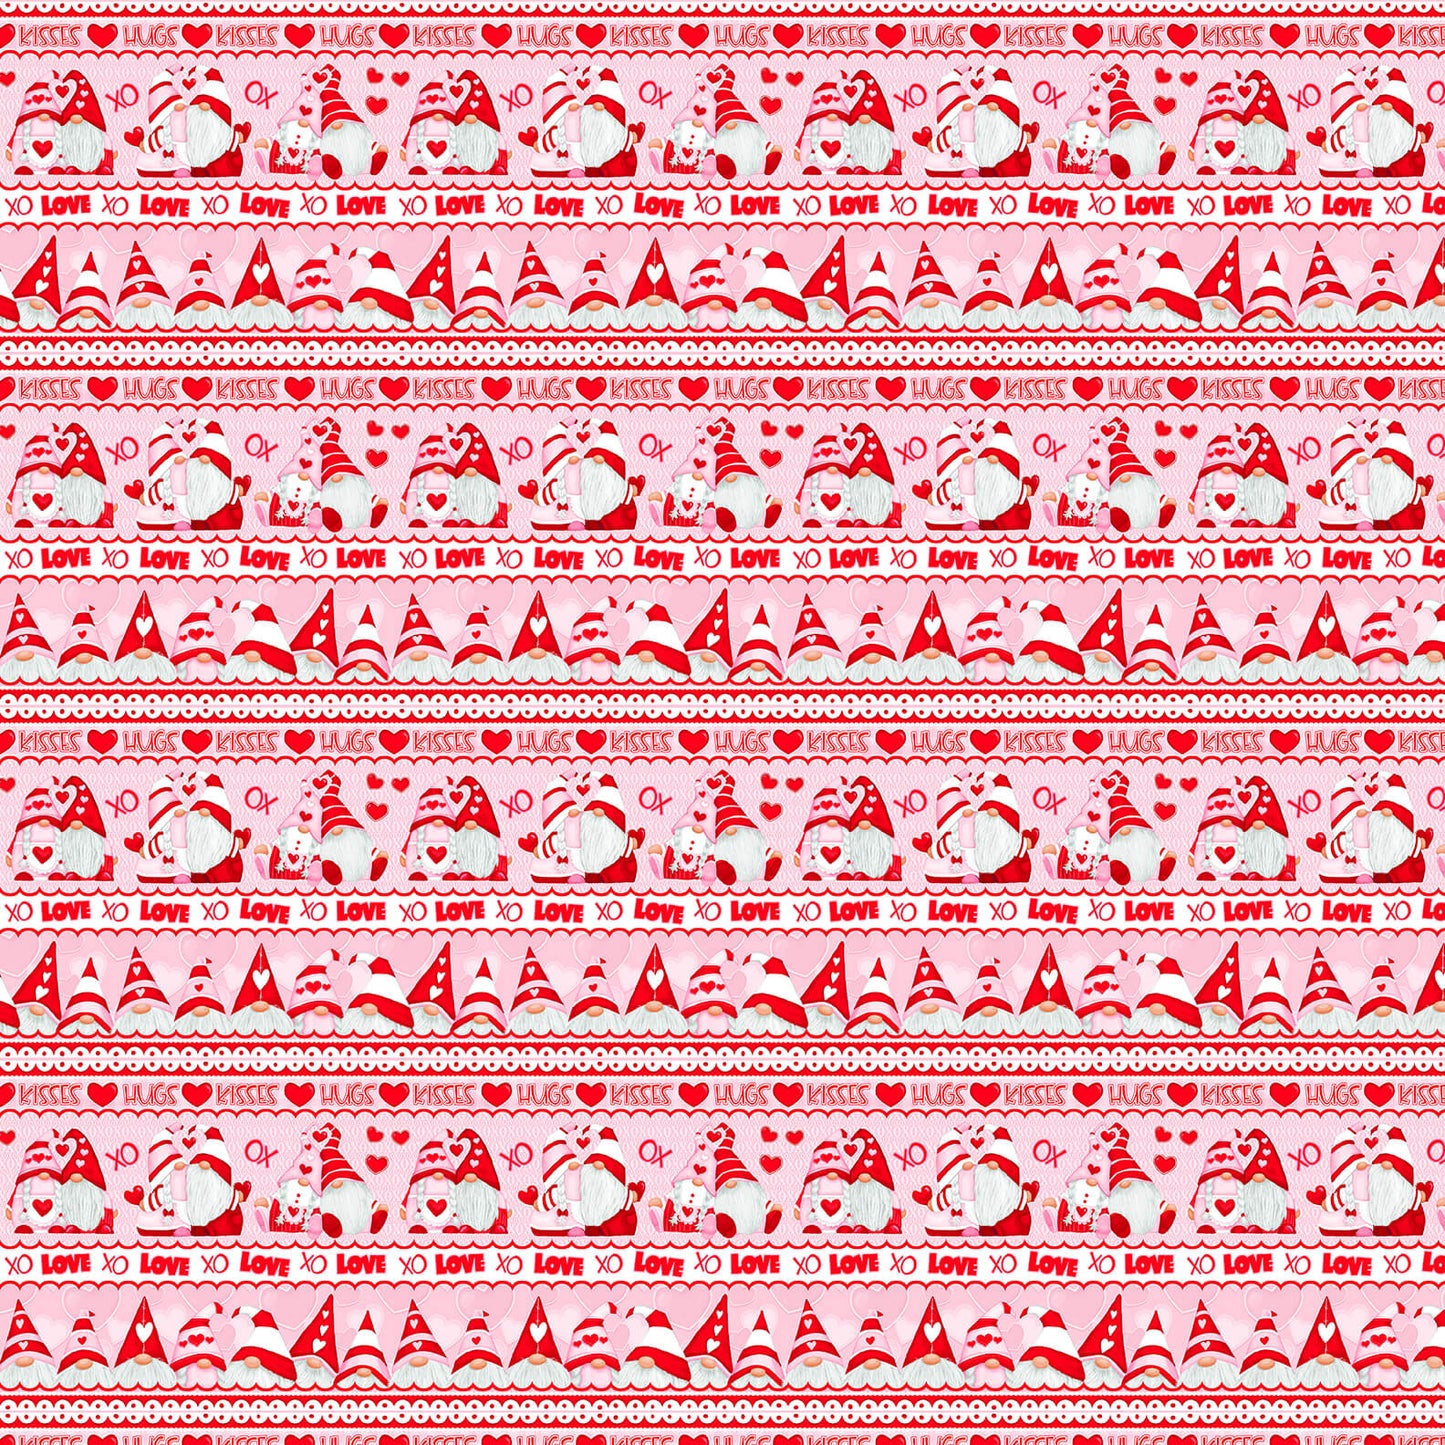 Henry Glass 1/2 yard Gnomie Love Gnome Valentine's Day Fabric - Border Stripe Quilt Cotton Fabric by the Yard